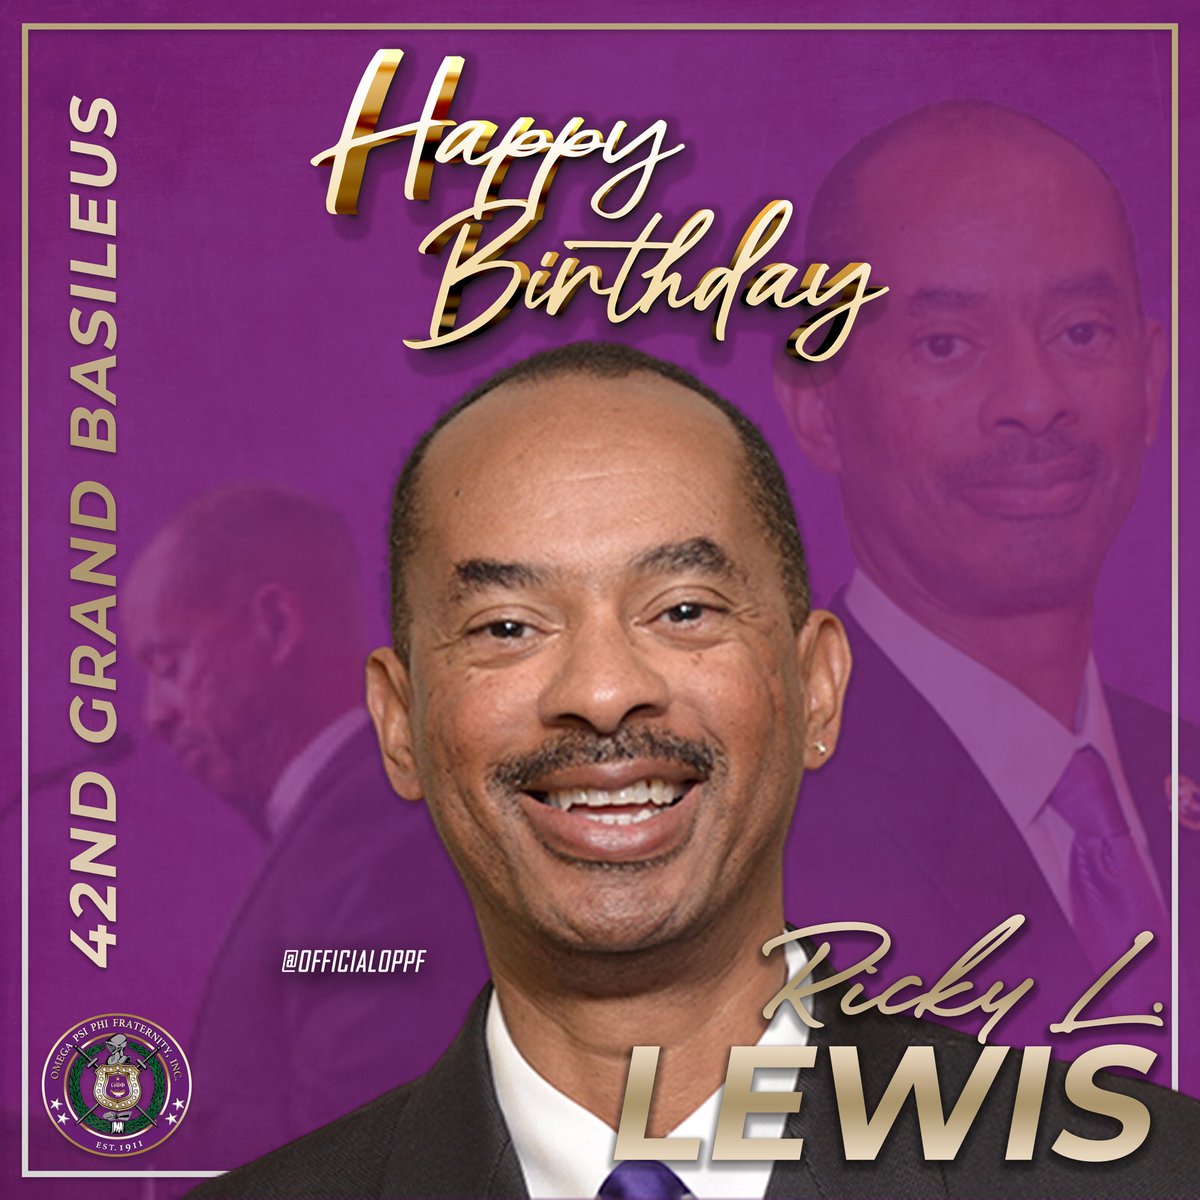 Happy Birthday to our 42nd Grand Basileus, affectionately known as ‘GB 42,’ Bro. Ricky L. Lewis. We would like to wish you well on this day and show appreciation for all of the work you have done for Omega, this far.